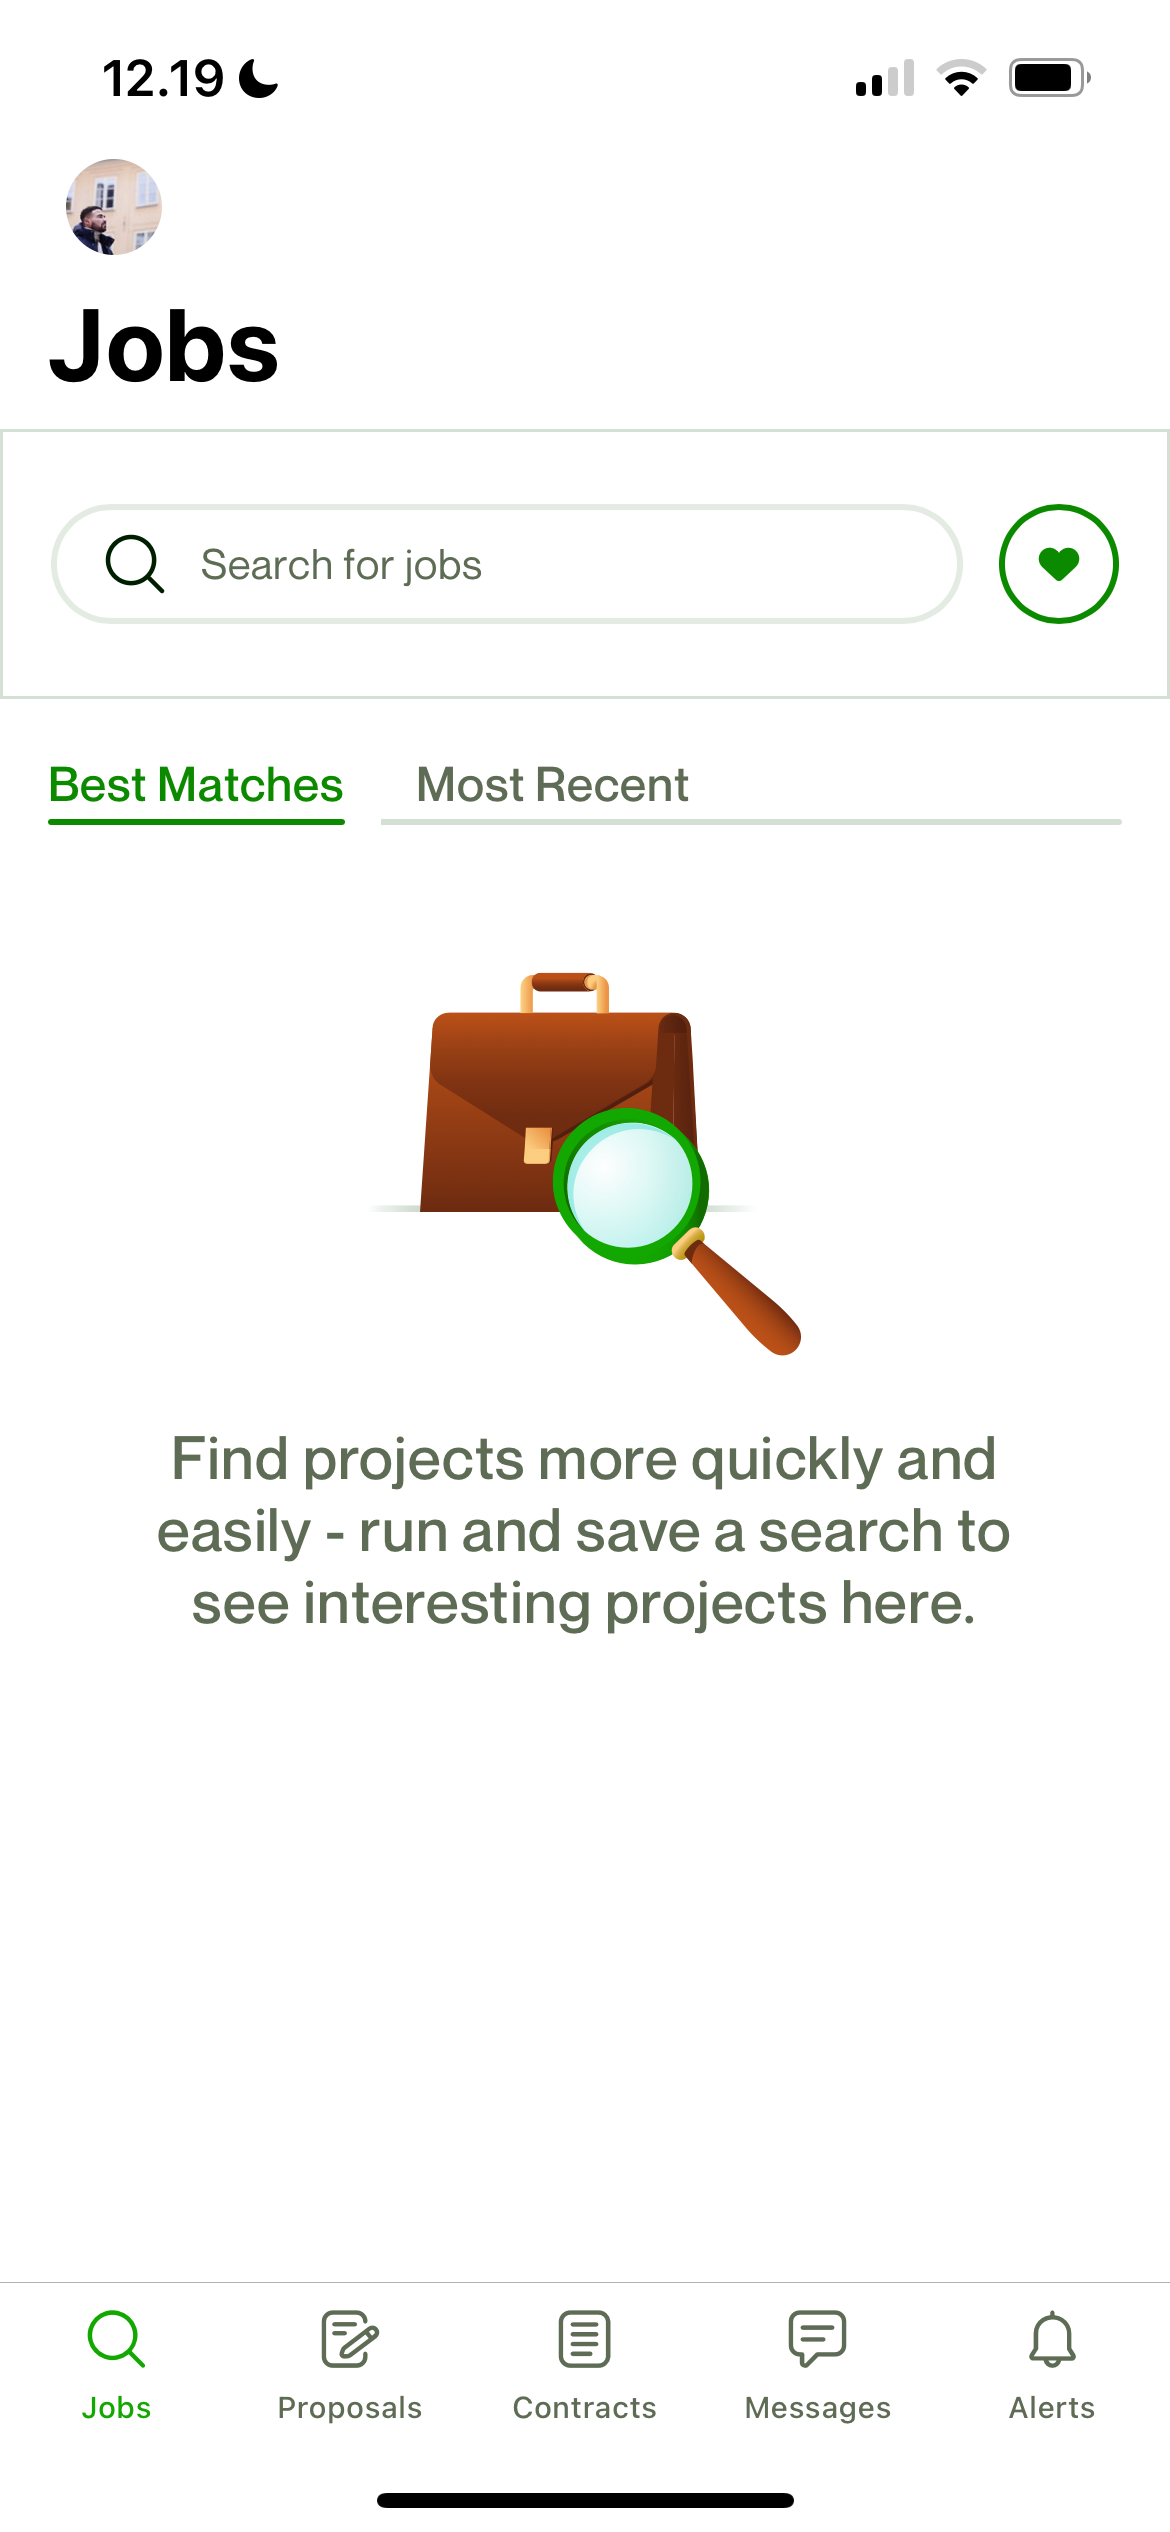 The Jobs Homepage on Upwork